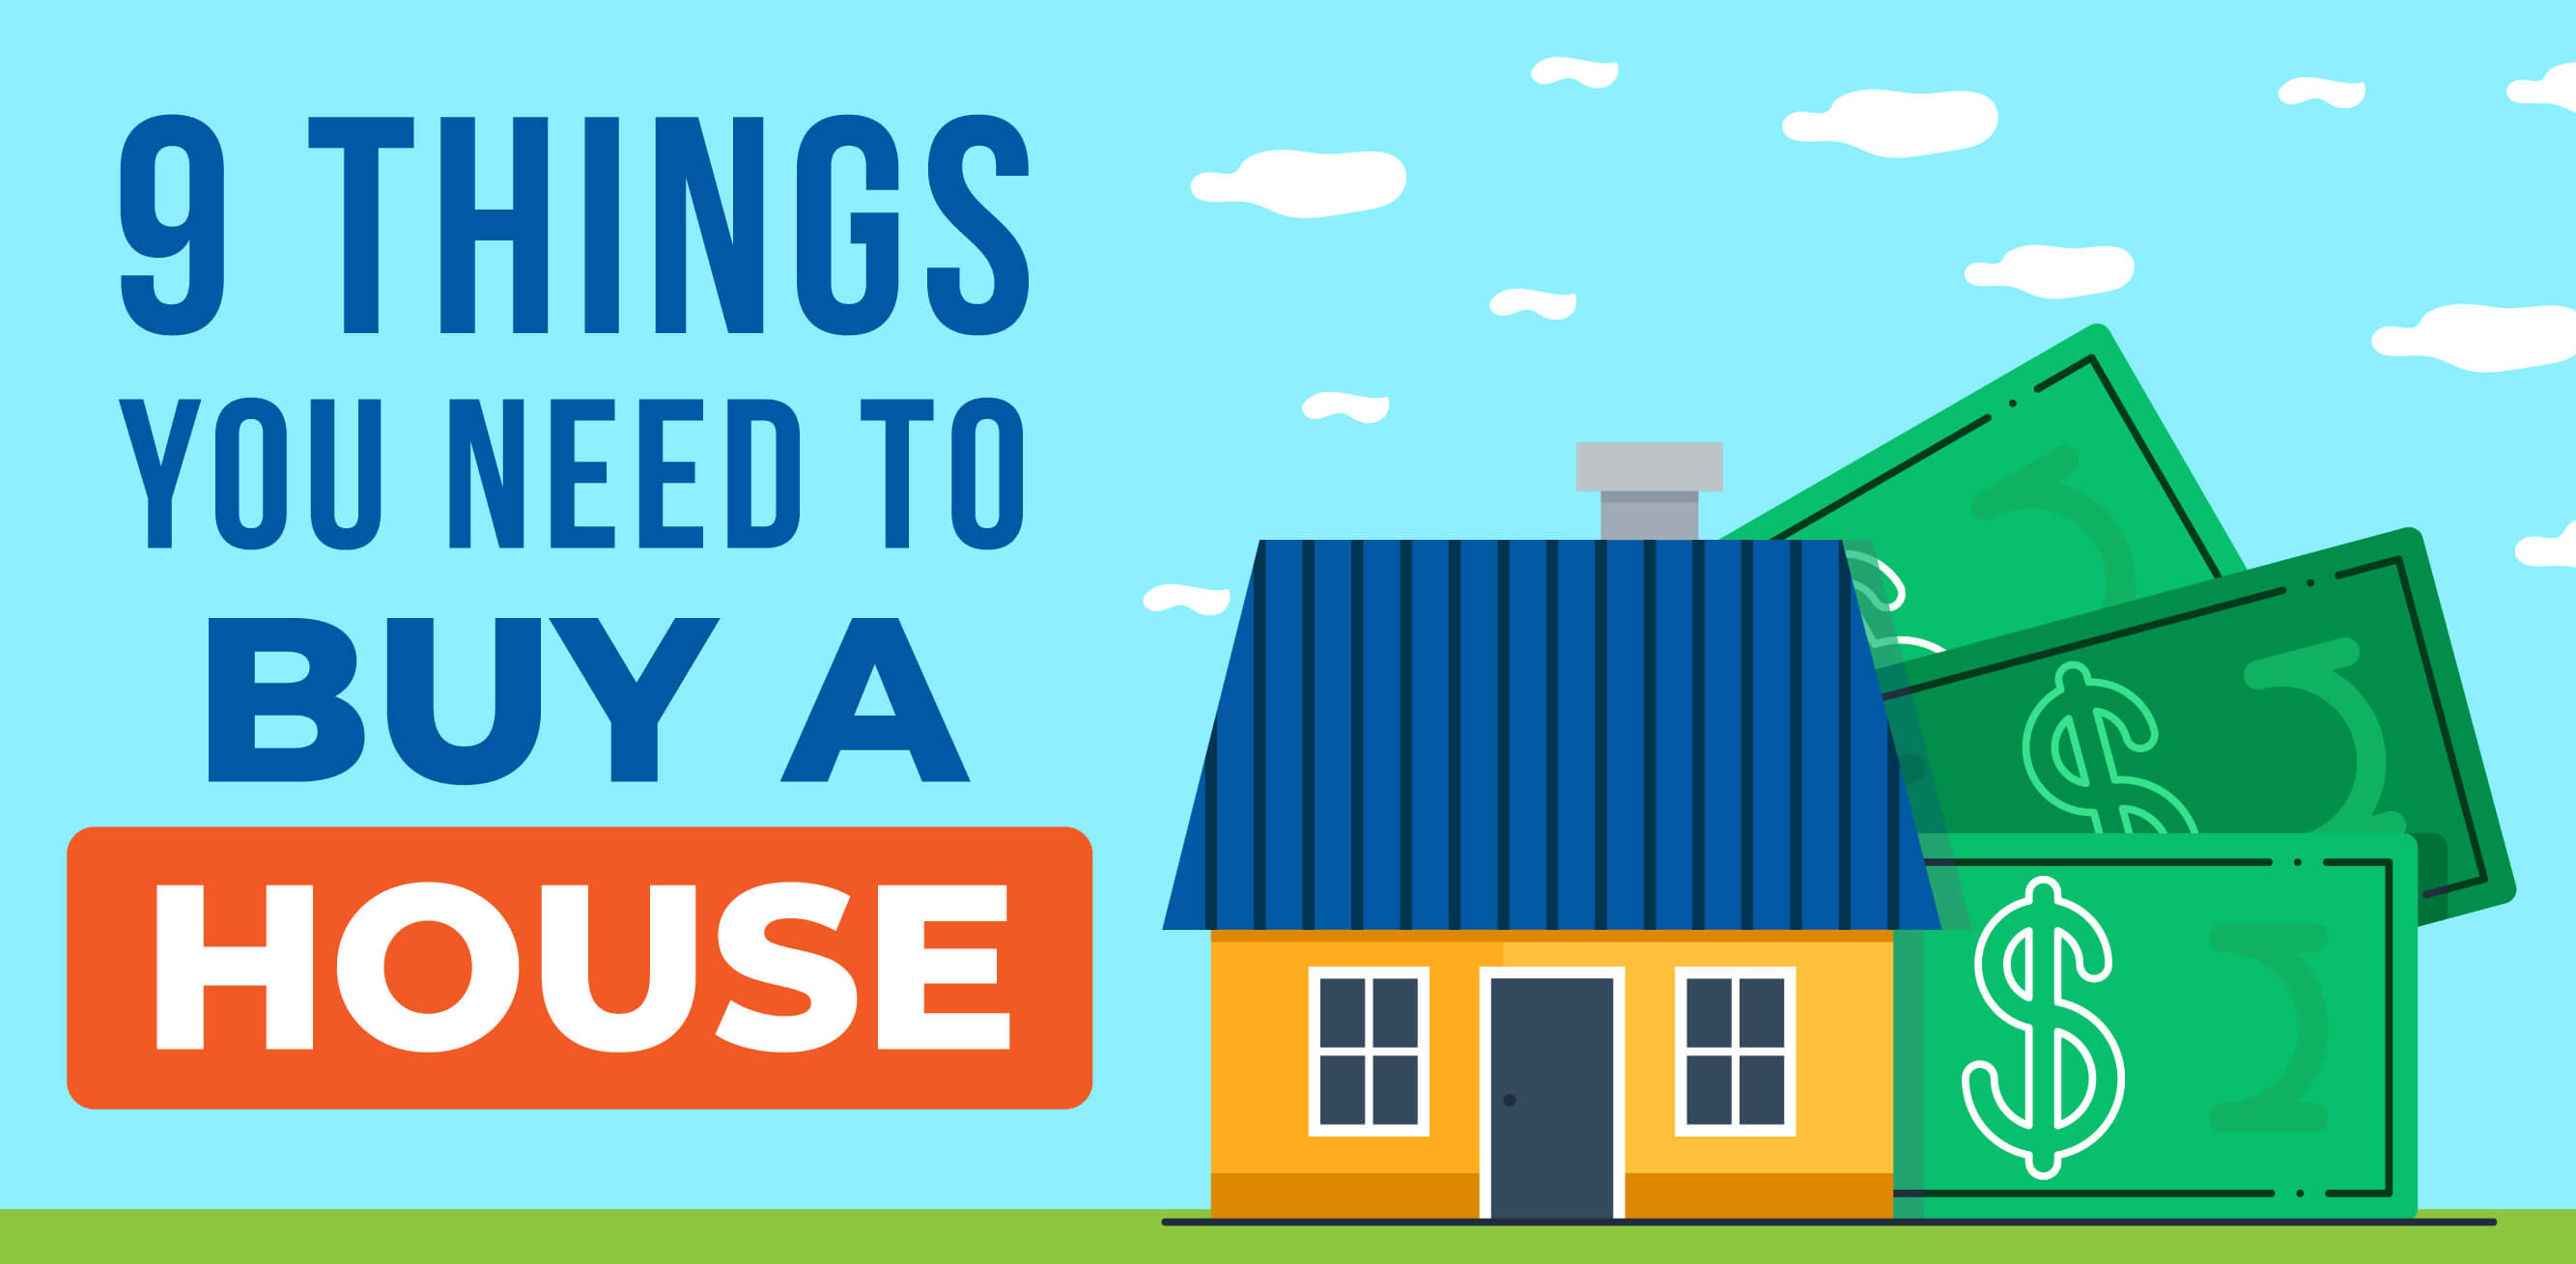 What do you need to buy a house? 9 Things you will need to buy a home!